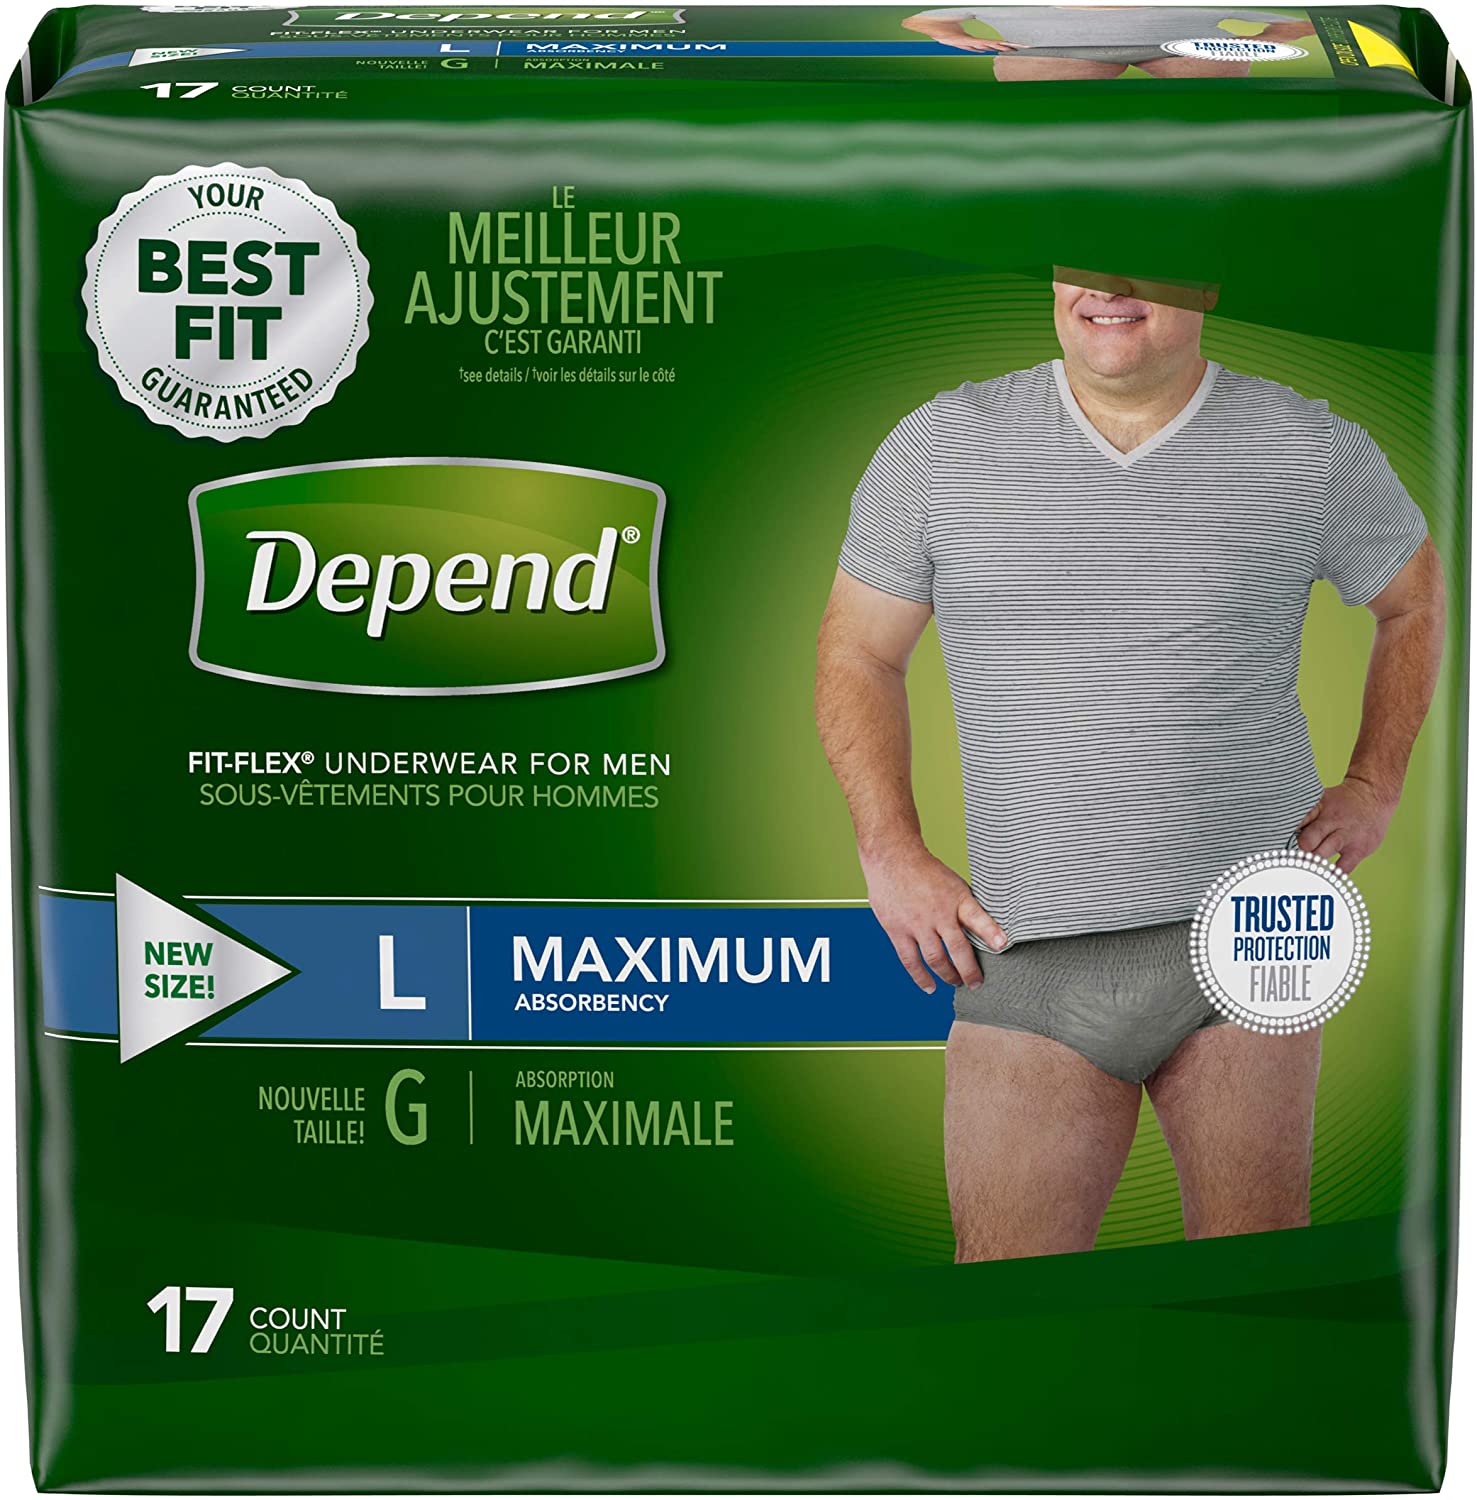  Prevail Mens Protective Daily Underwear, Size 2X-Large, Maximum Absorbency